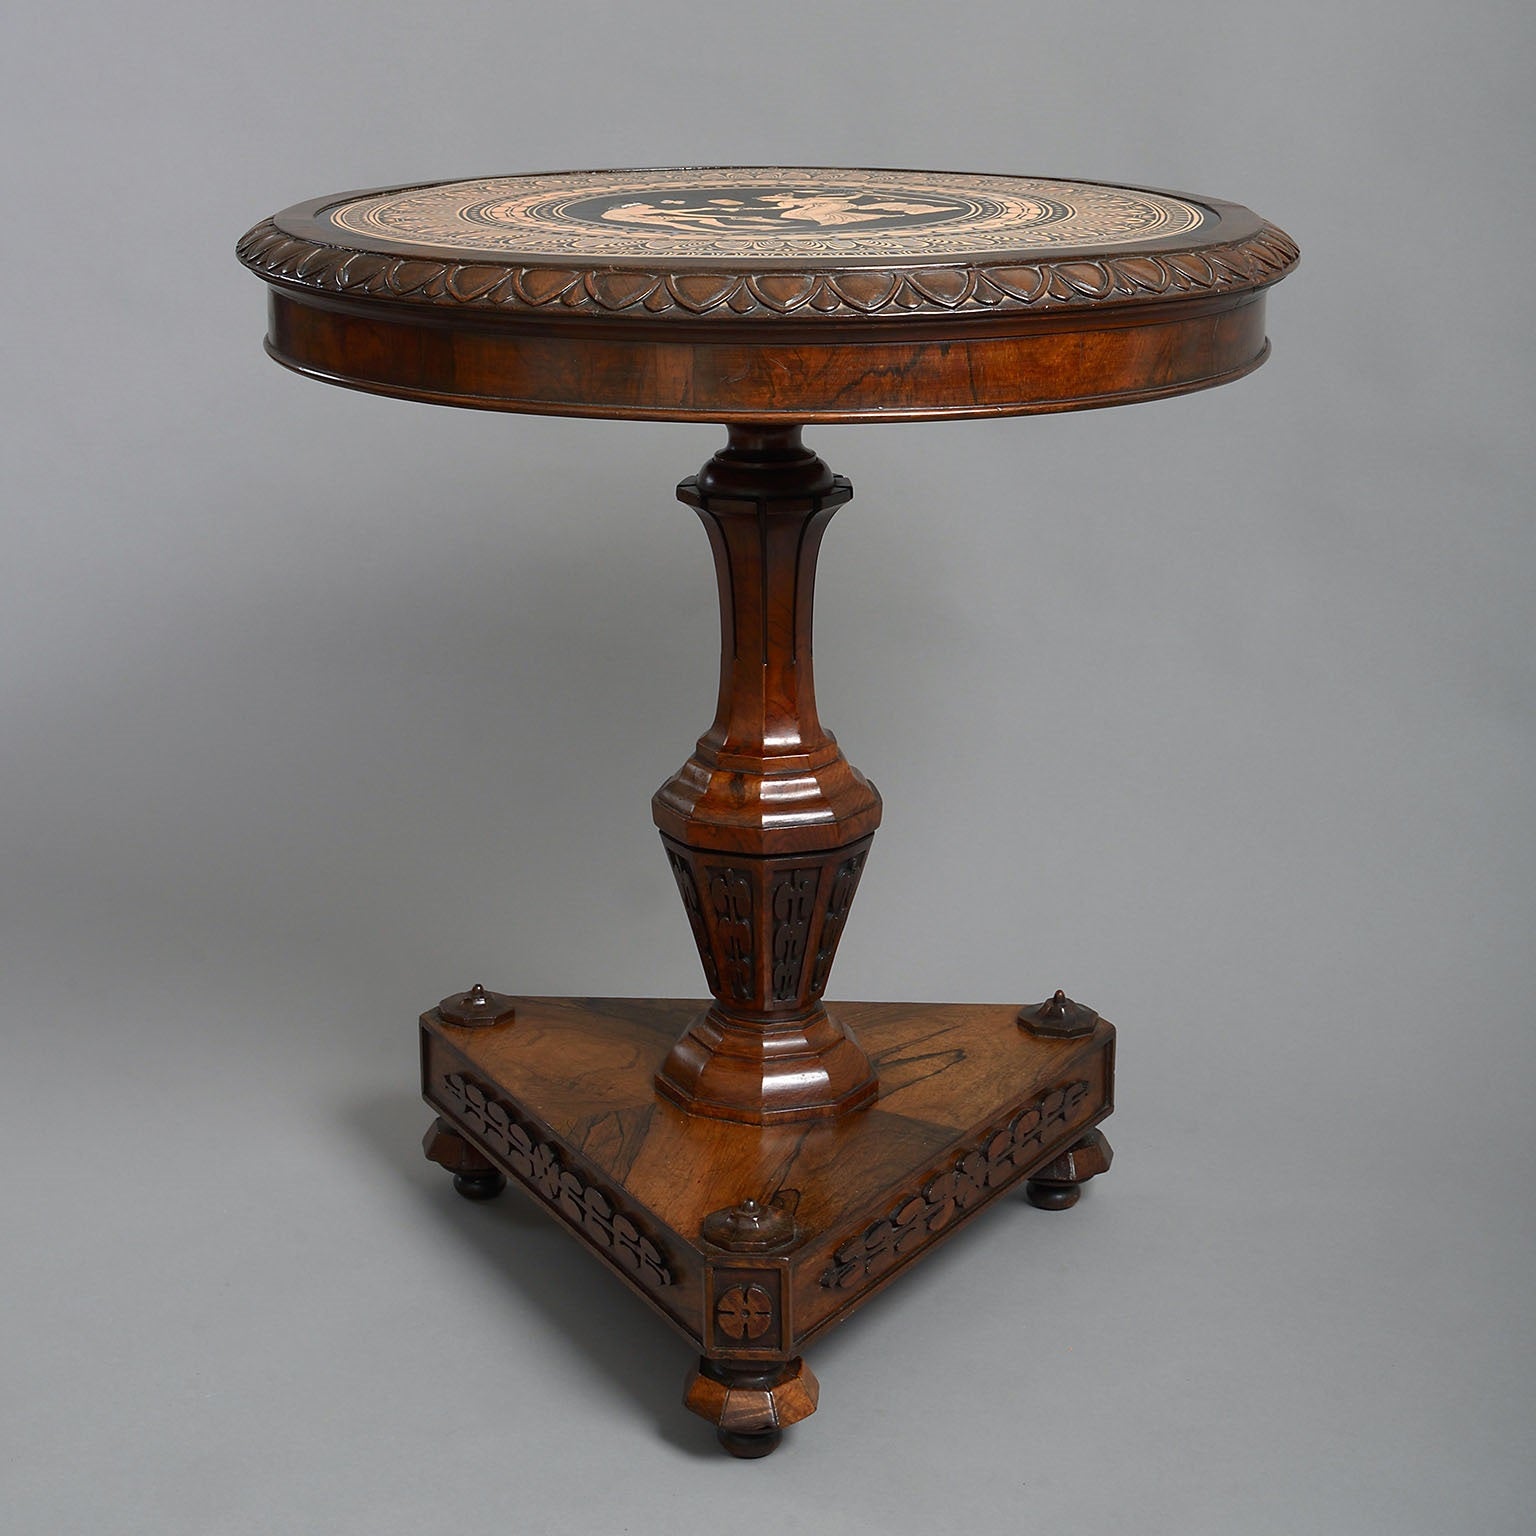 The Coghill/Englefield Centre Table with  a Neo-Classical Ceramic Top by W.T. Copeland